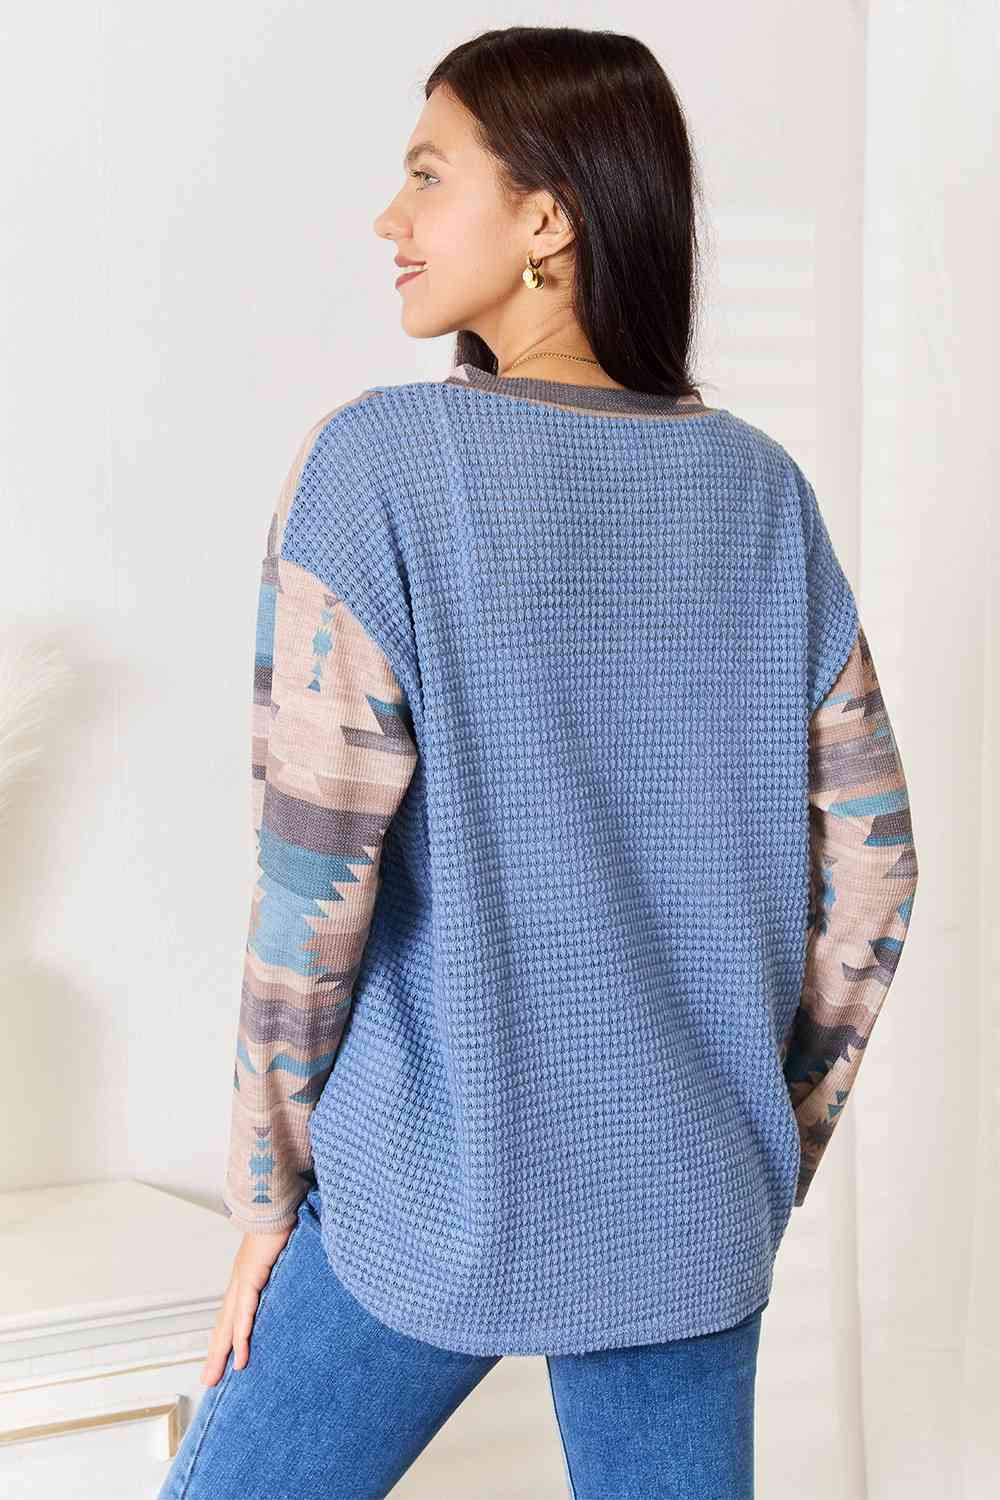 Sew In Love Full Size Waffle Knit Tribal Print Top